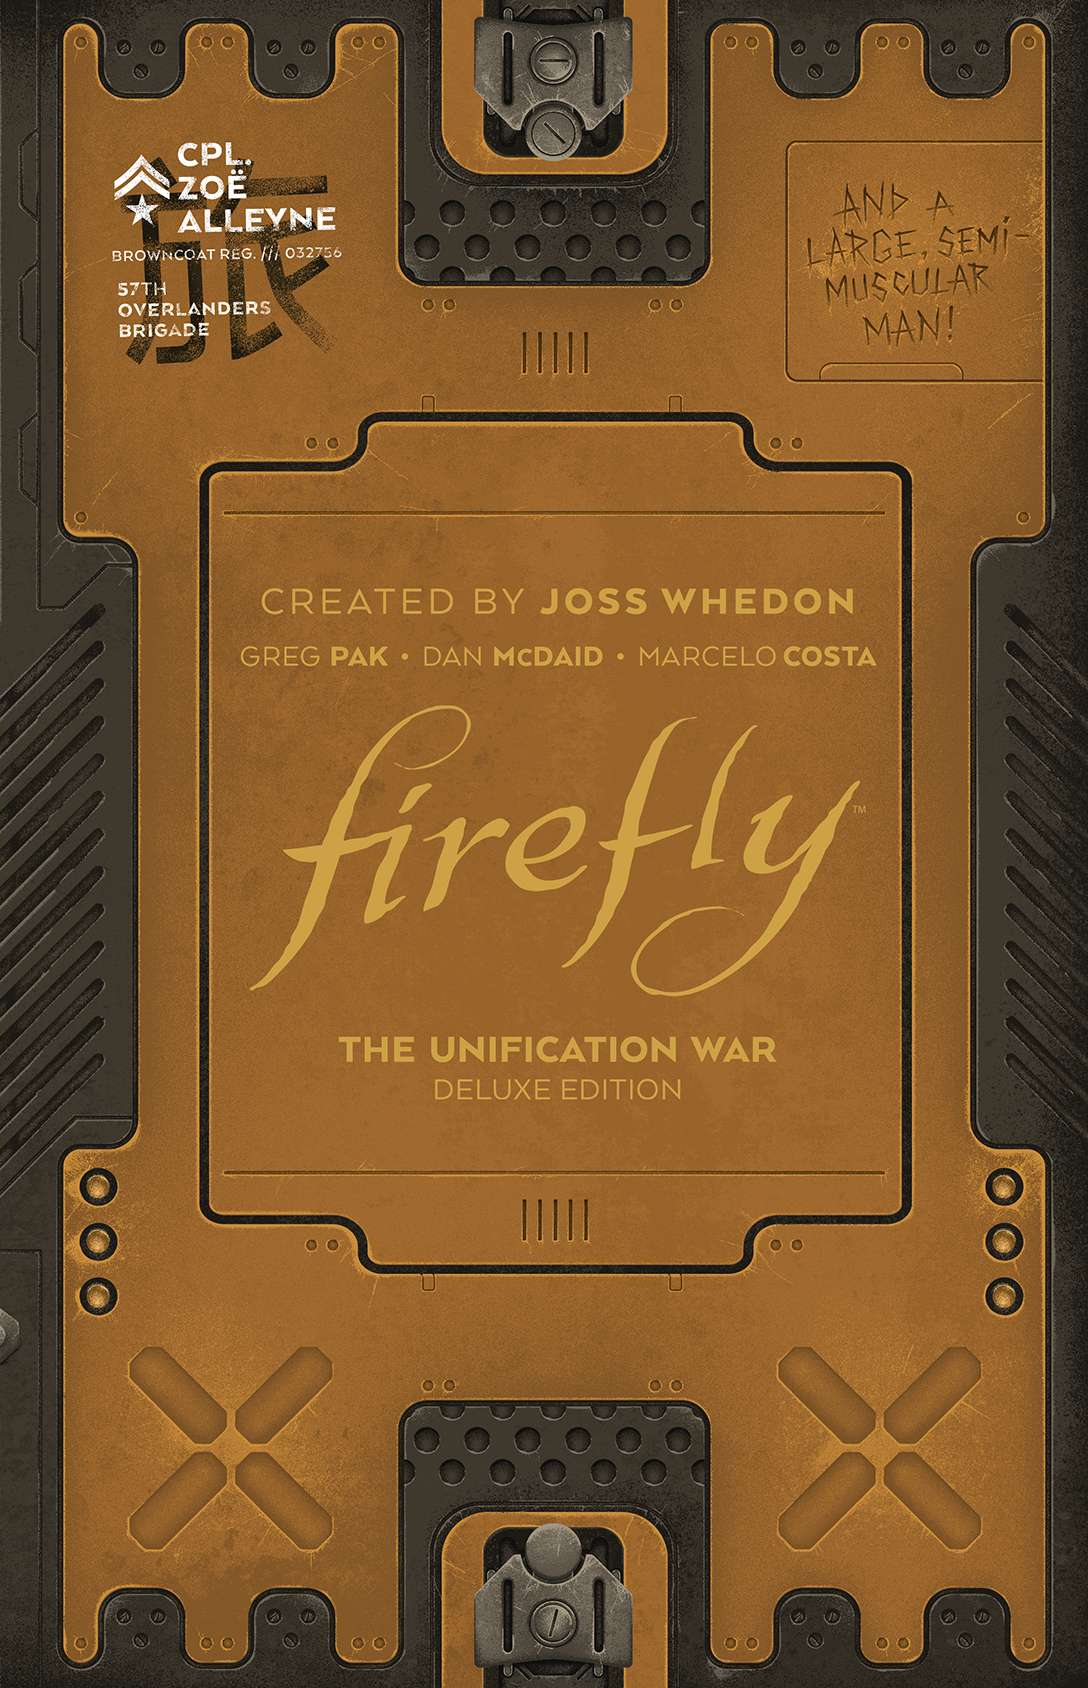 Firefly Unification War Deluxe Edition Hardcover